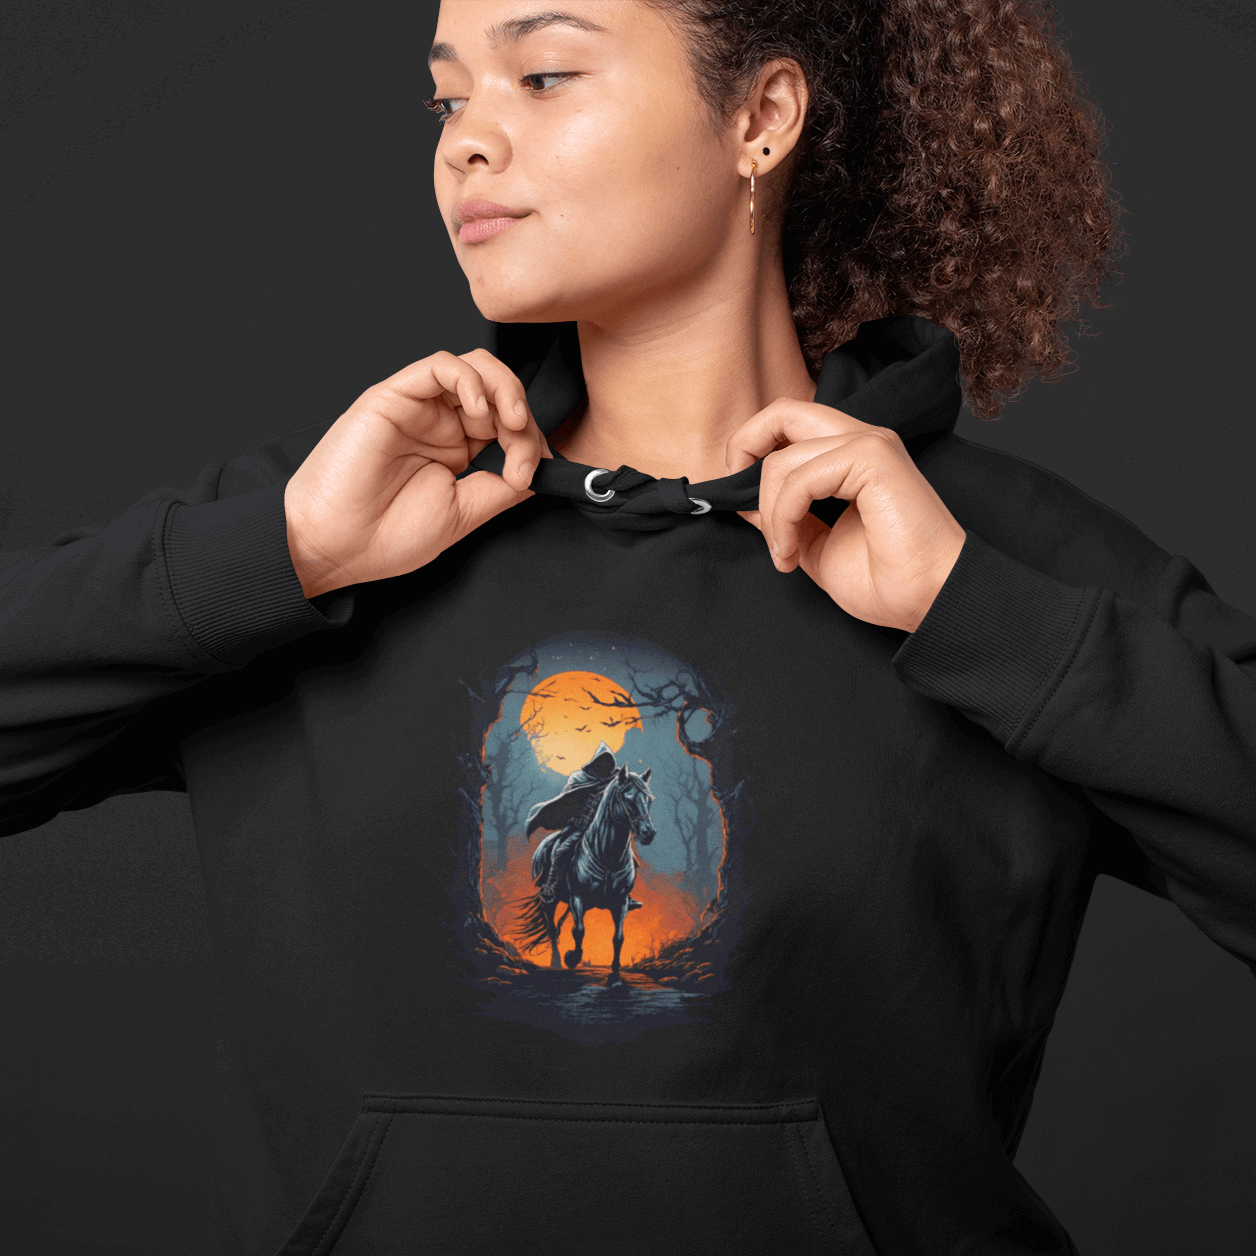 Ghostly Pursuit Hoodie from Fierce Fusion